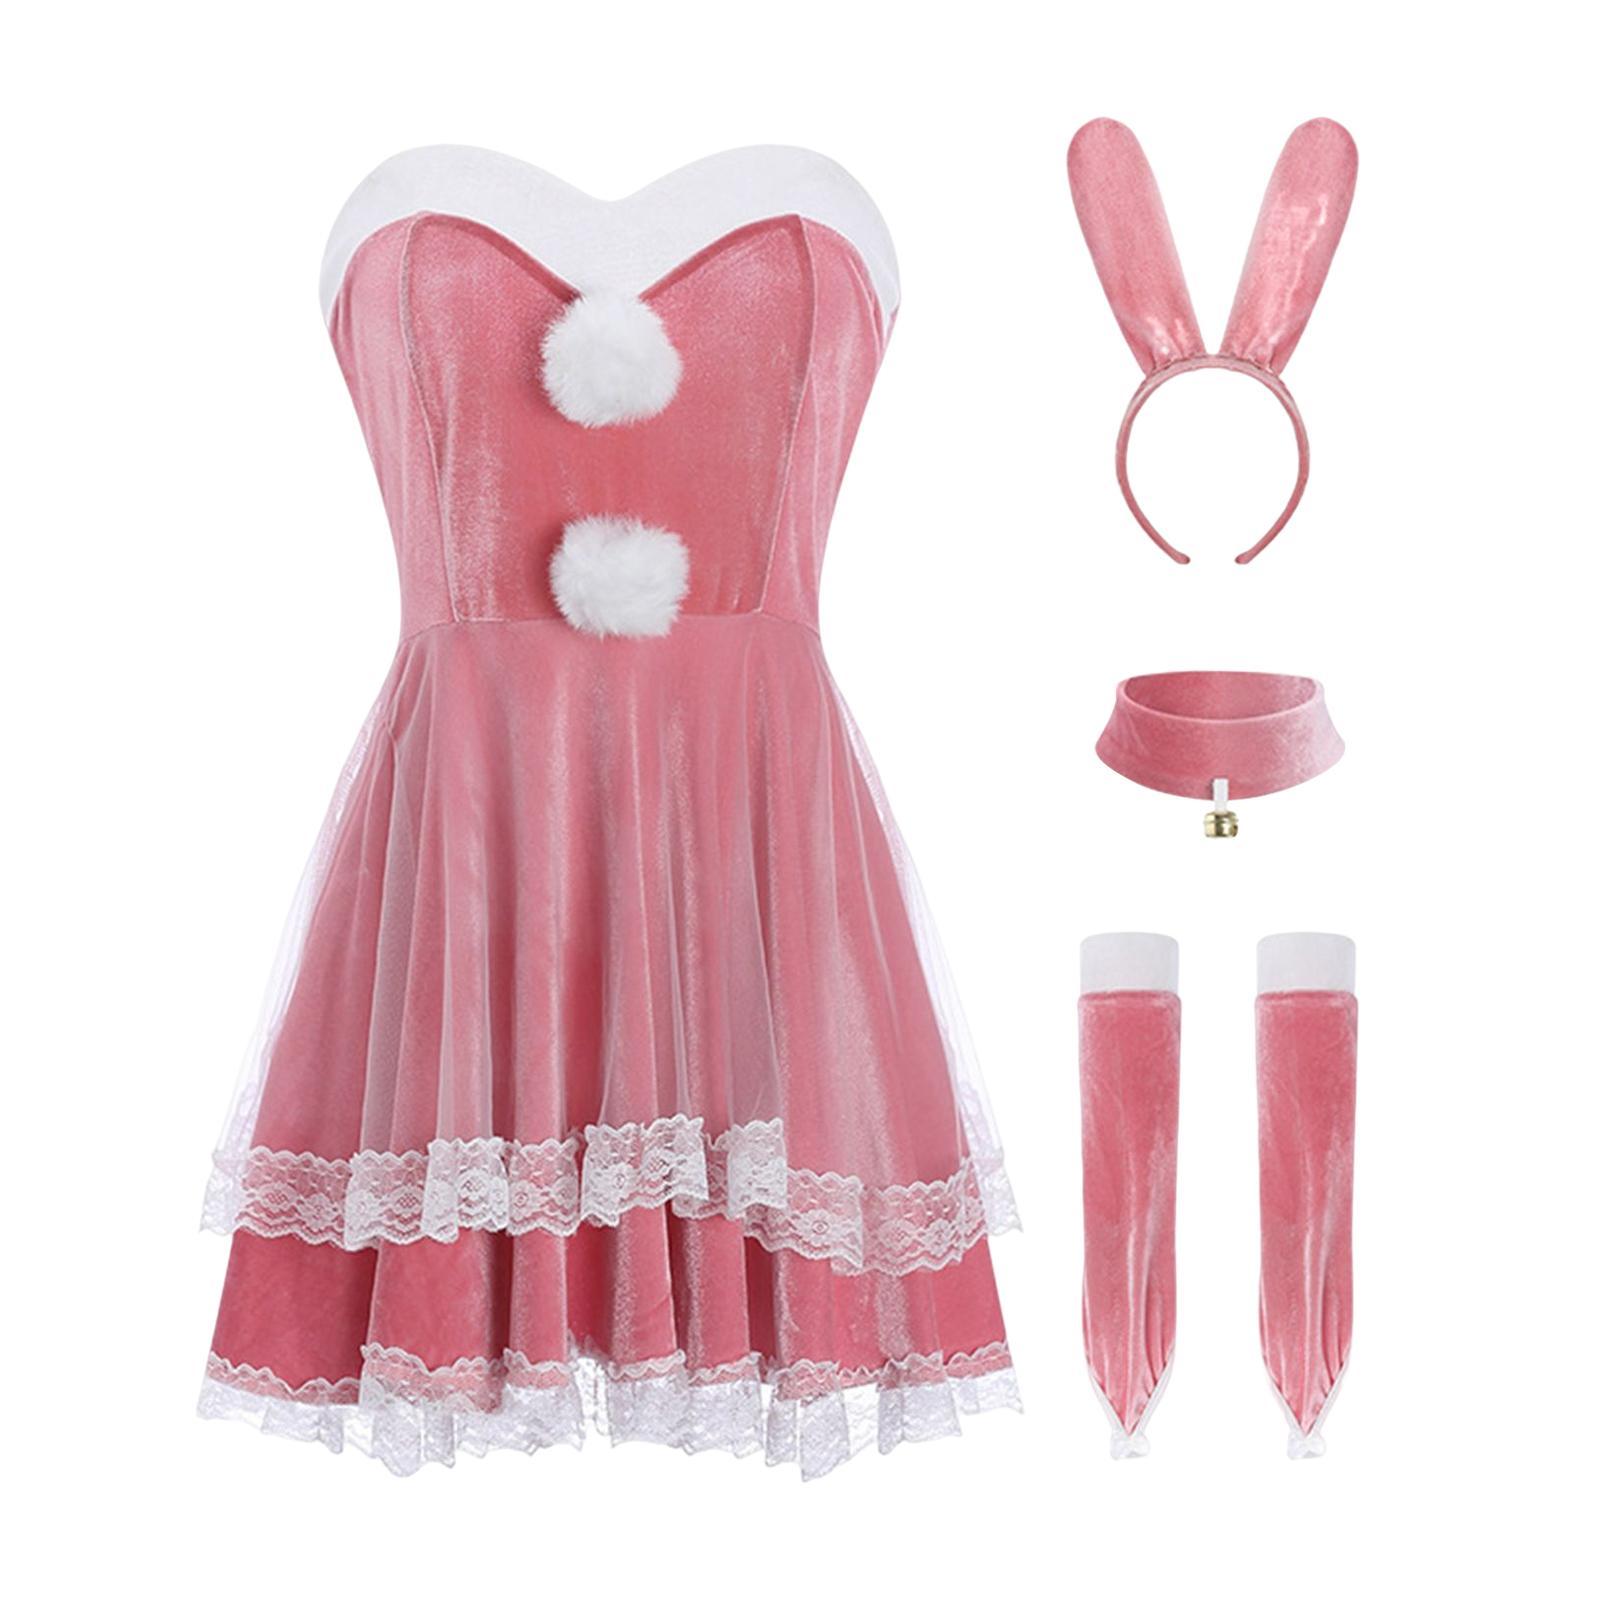 Classic Bunny Costume Cosplay W/ Bunny Ears Christmas Party Dress up